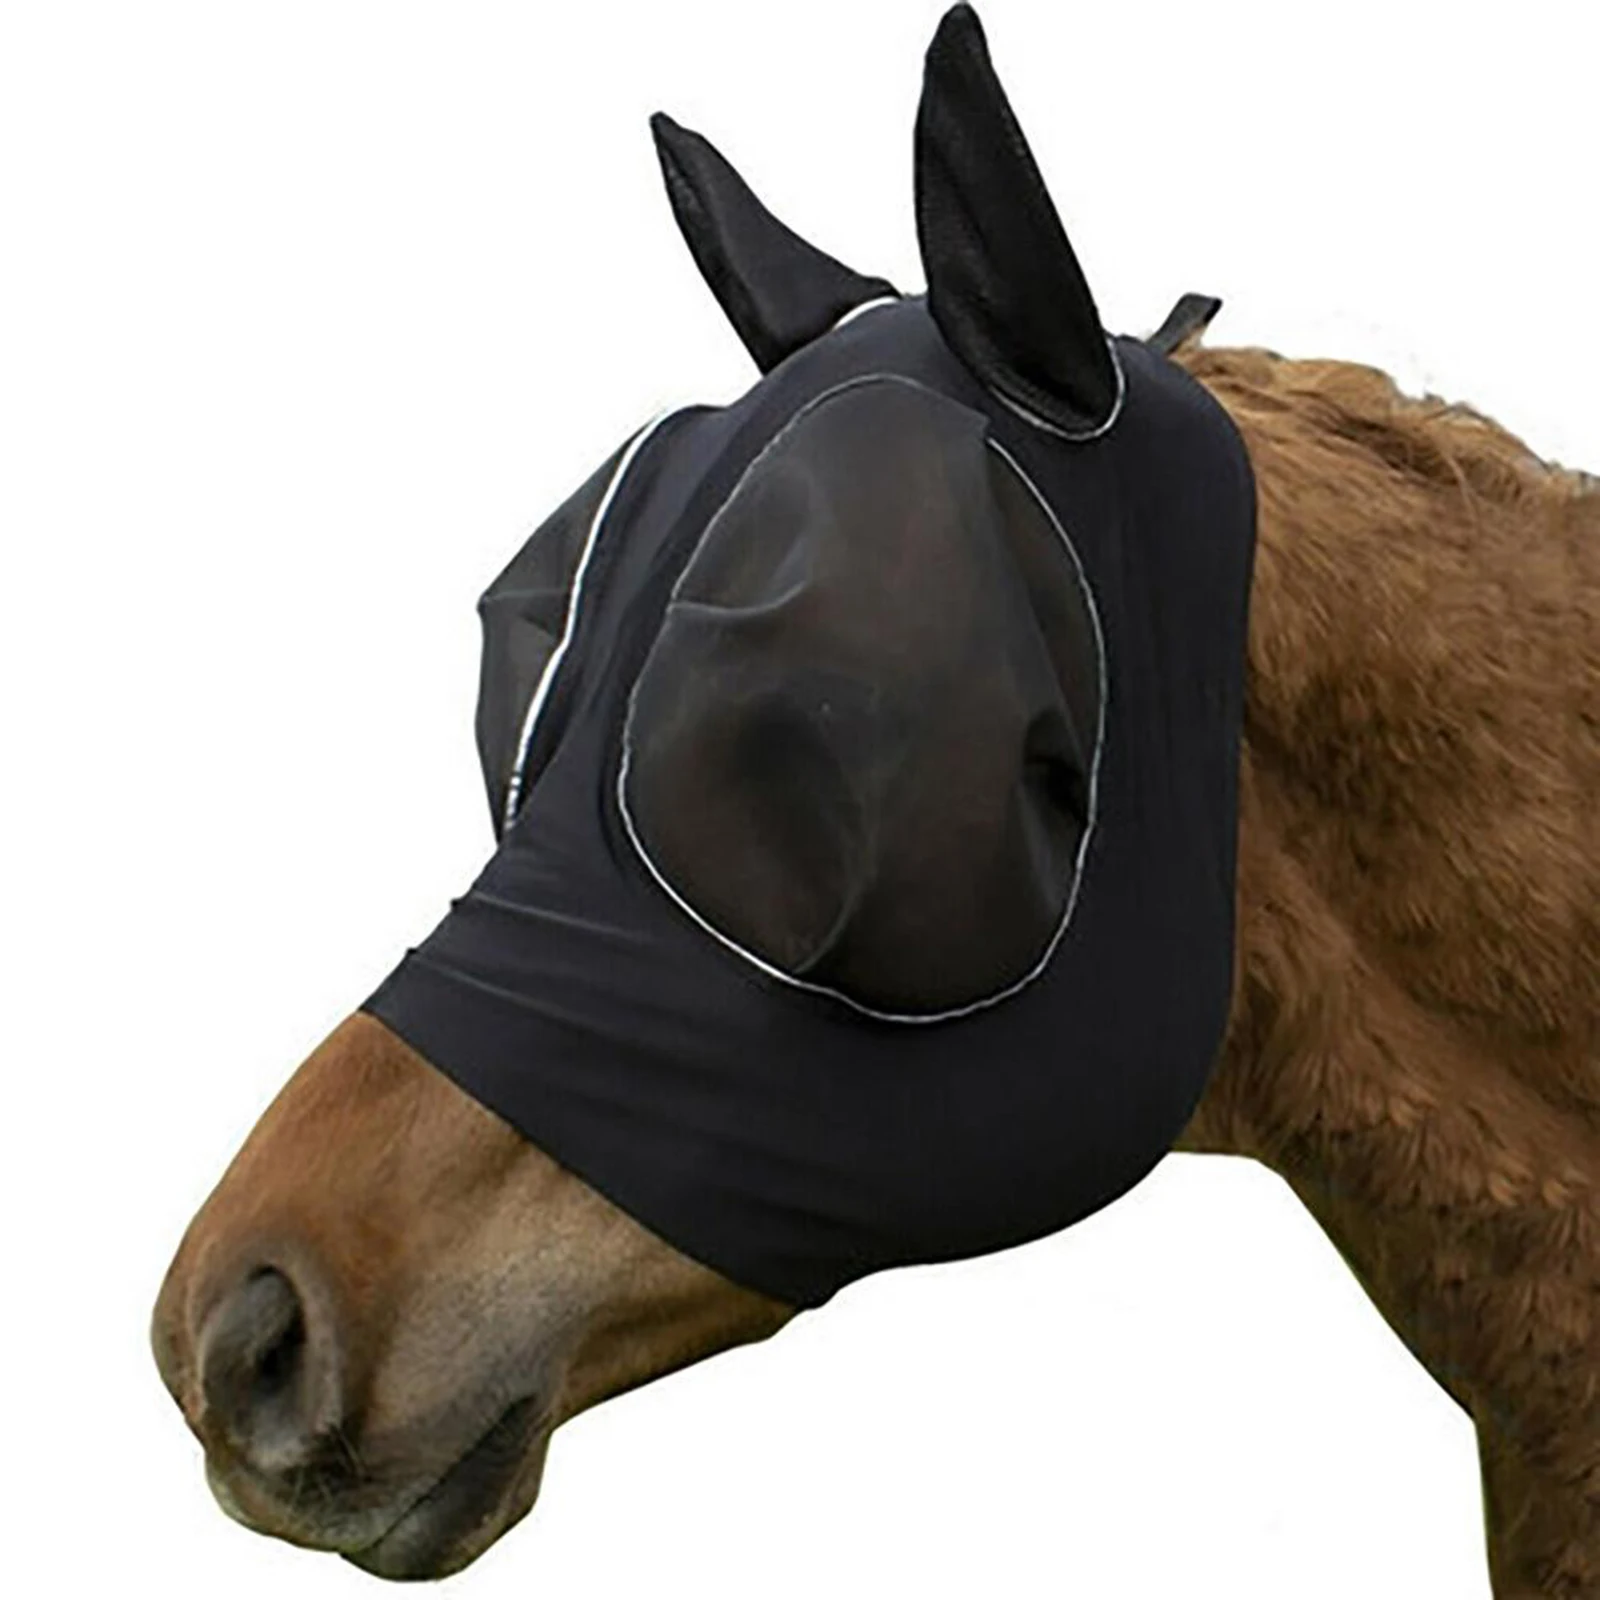 Anti-Mosquito Mesh Equine Horse Fly Mask Horse Head Cover Comfortable Anti Fly Files Mask For Horse Pony Cob Arab Protects